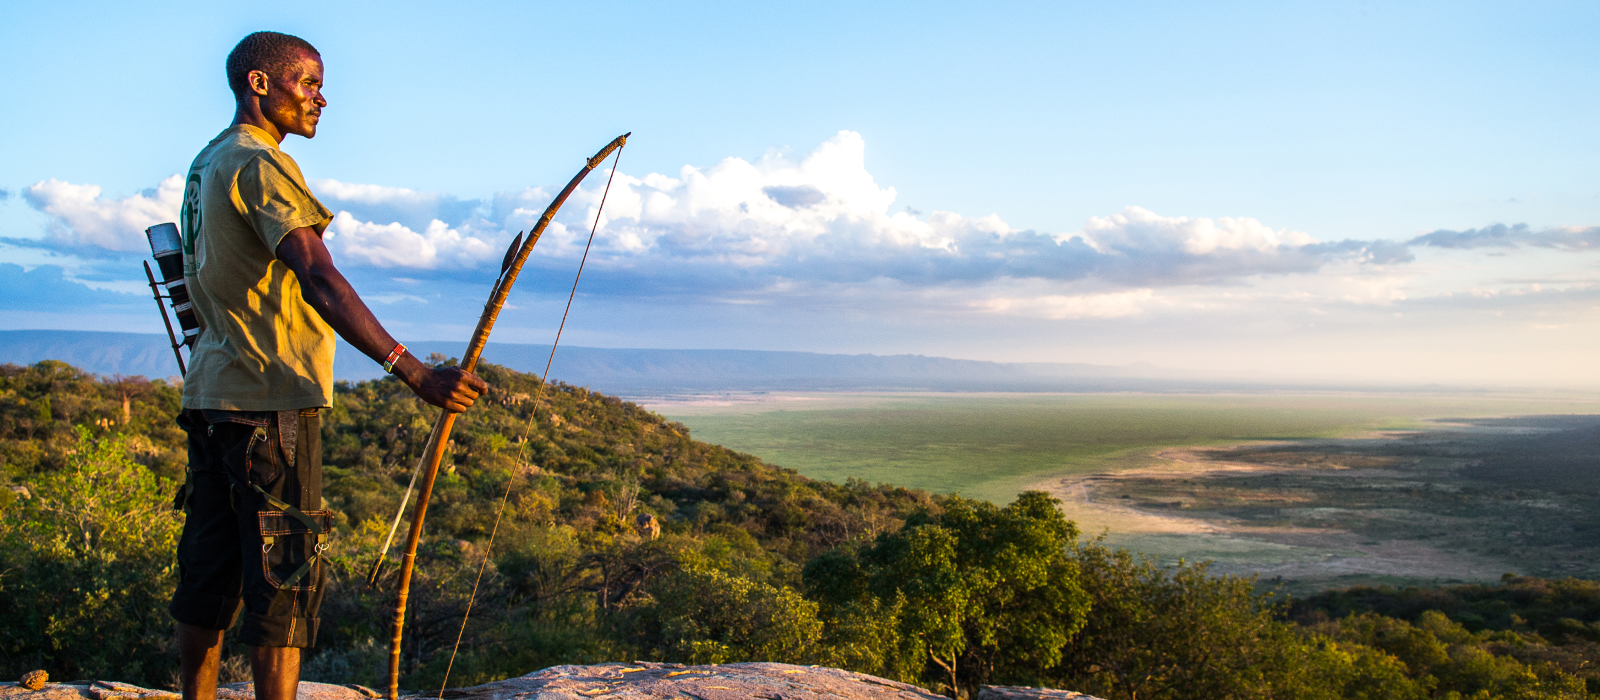 Hadza and Datooga communities live in the Yaeda Valley. Traditionally, they are the guardians of the forest.